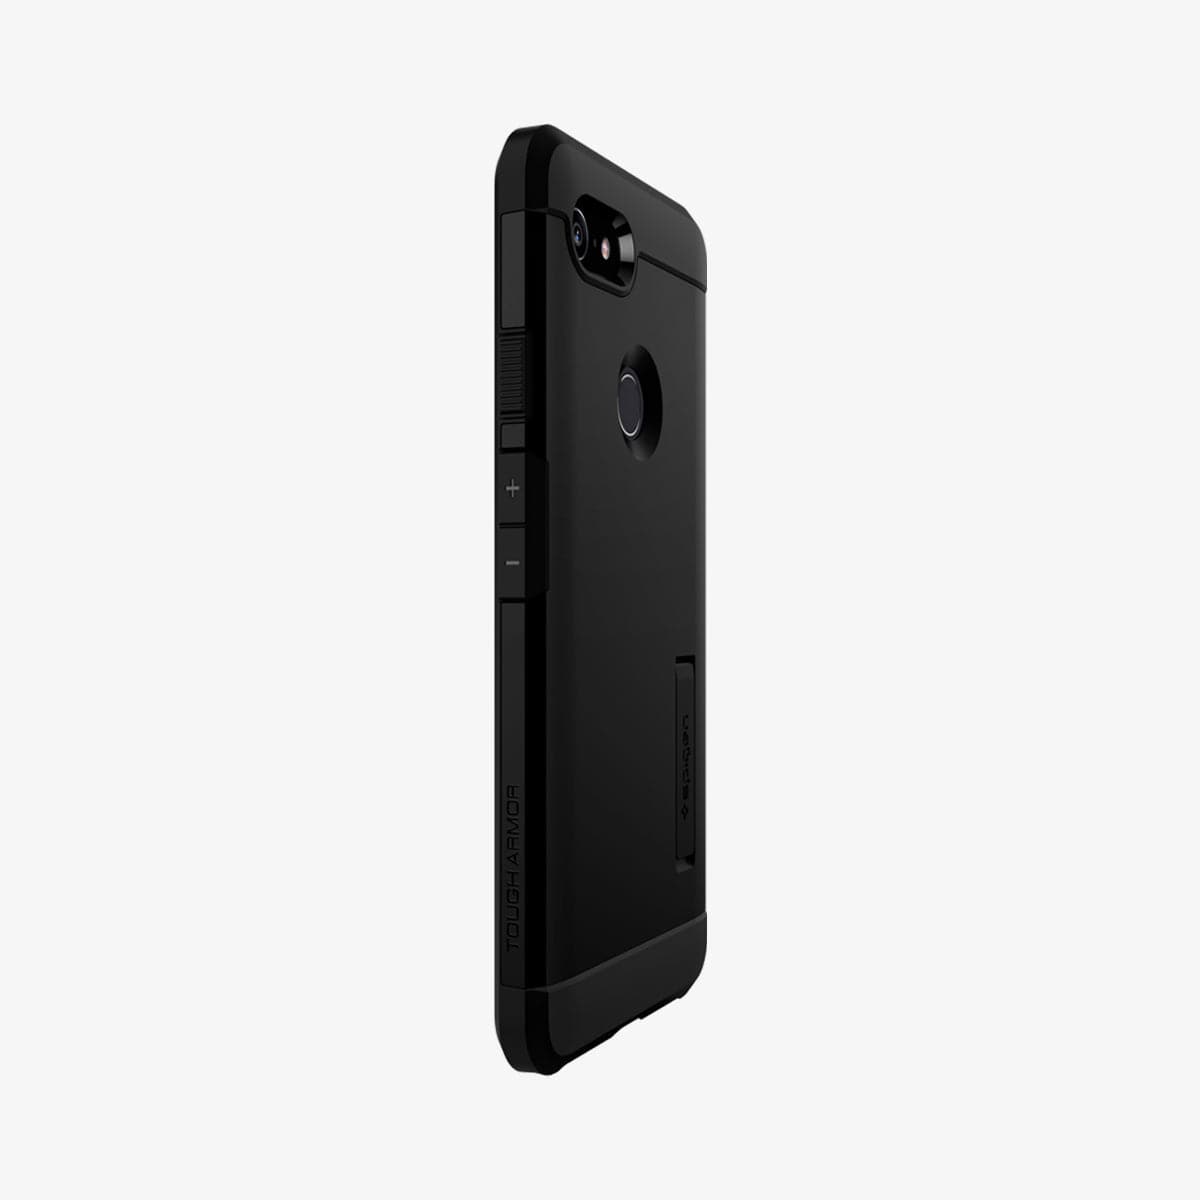 F20CS25024 - Pixel 3XL Case Tough Armor in black showing the side and back